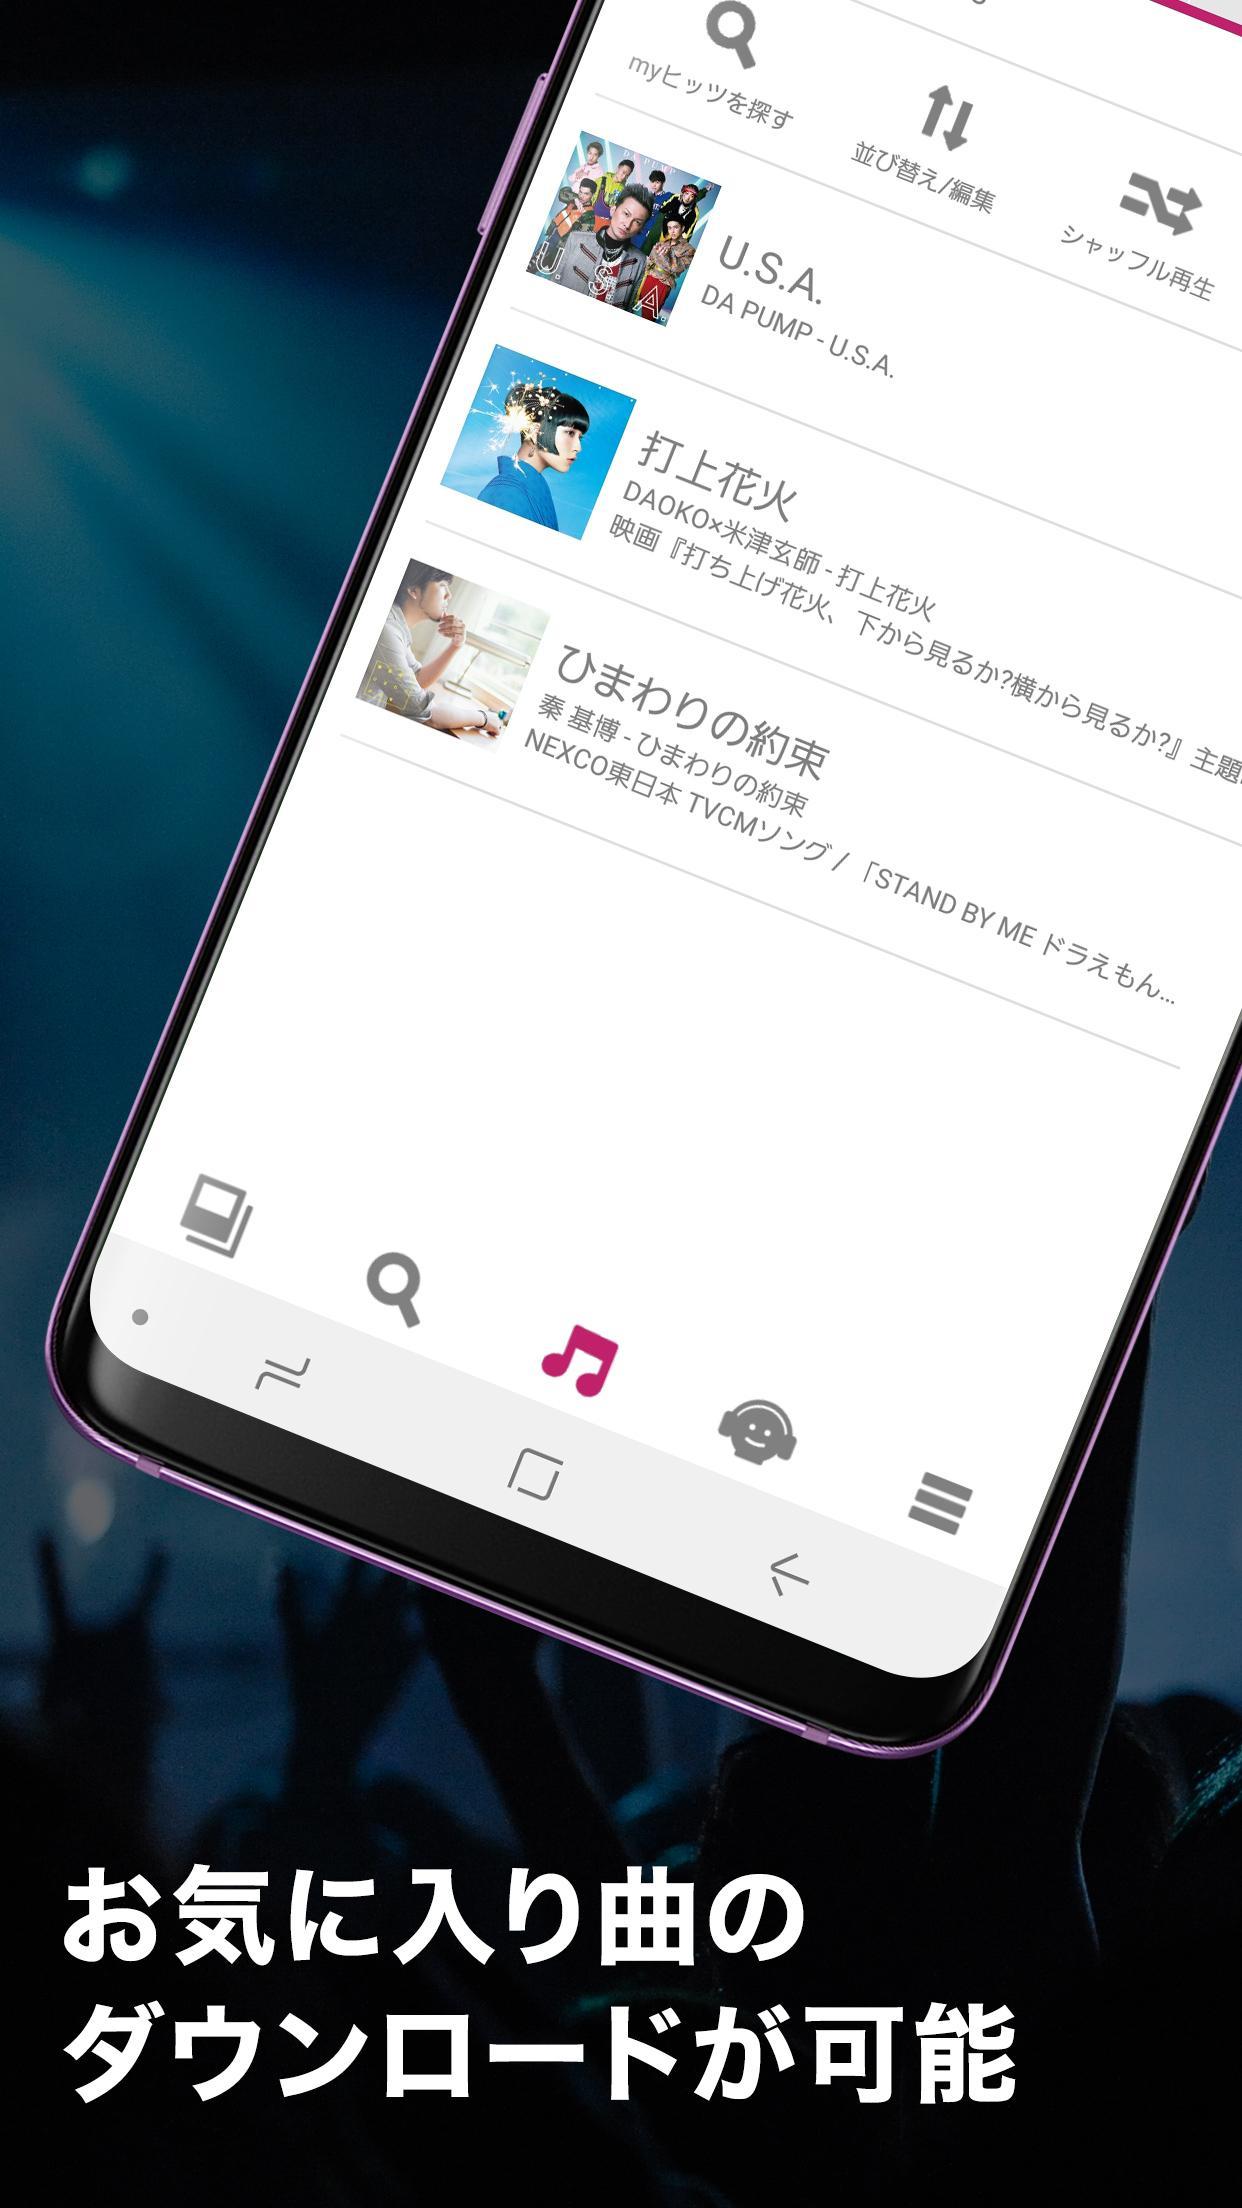 Dヒッツ For Android Apk Download